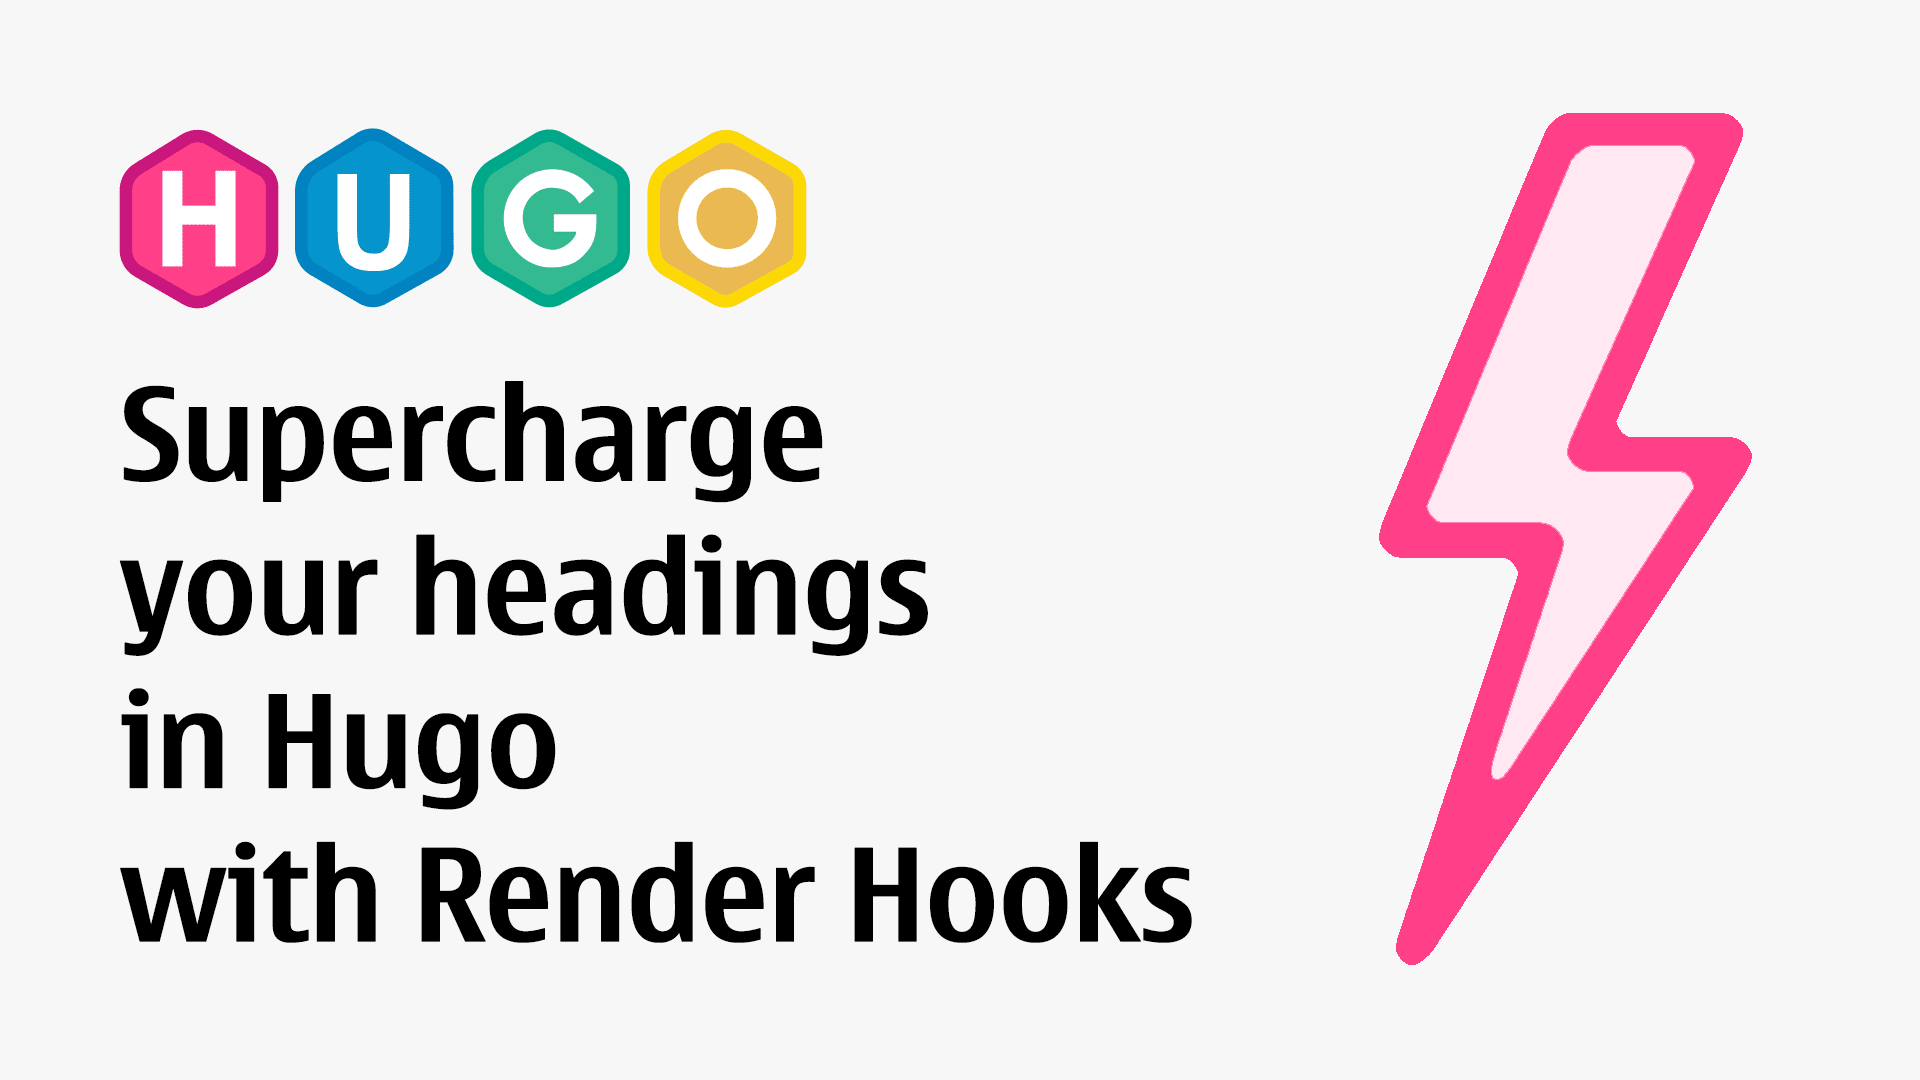 Supercharge your headings in Hugo with Render Hooks